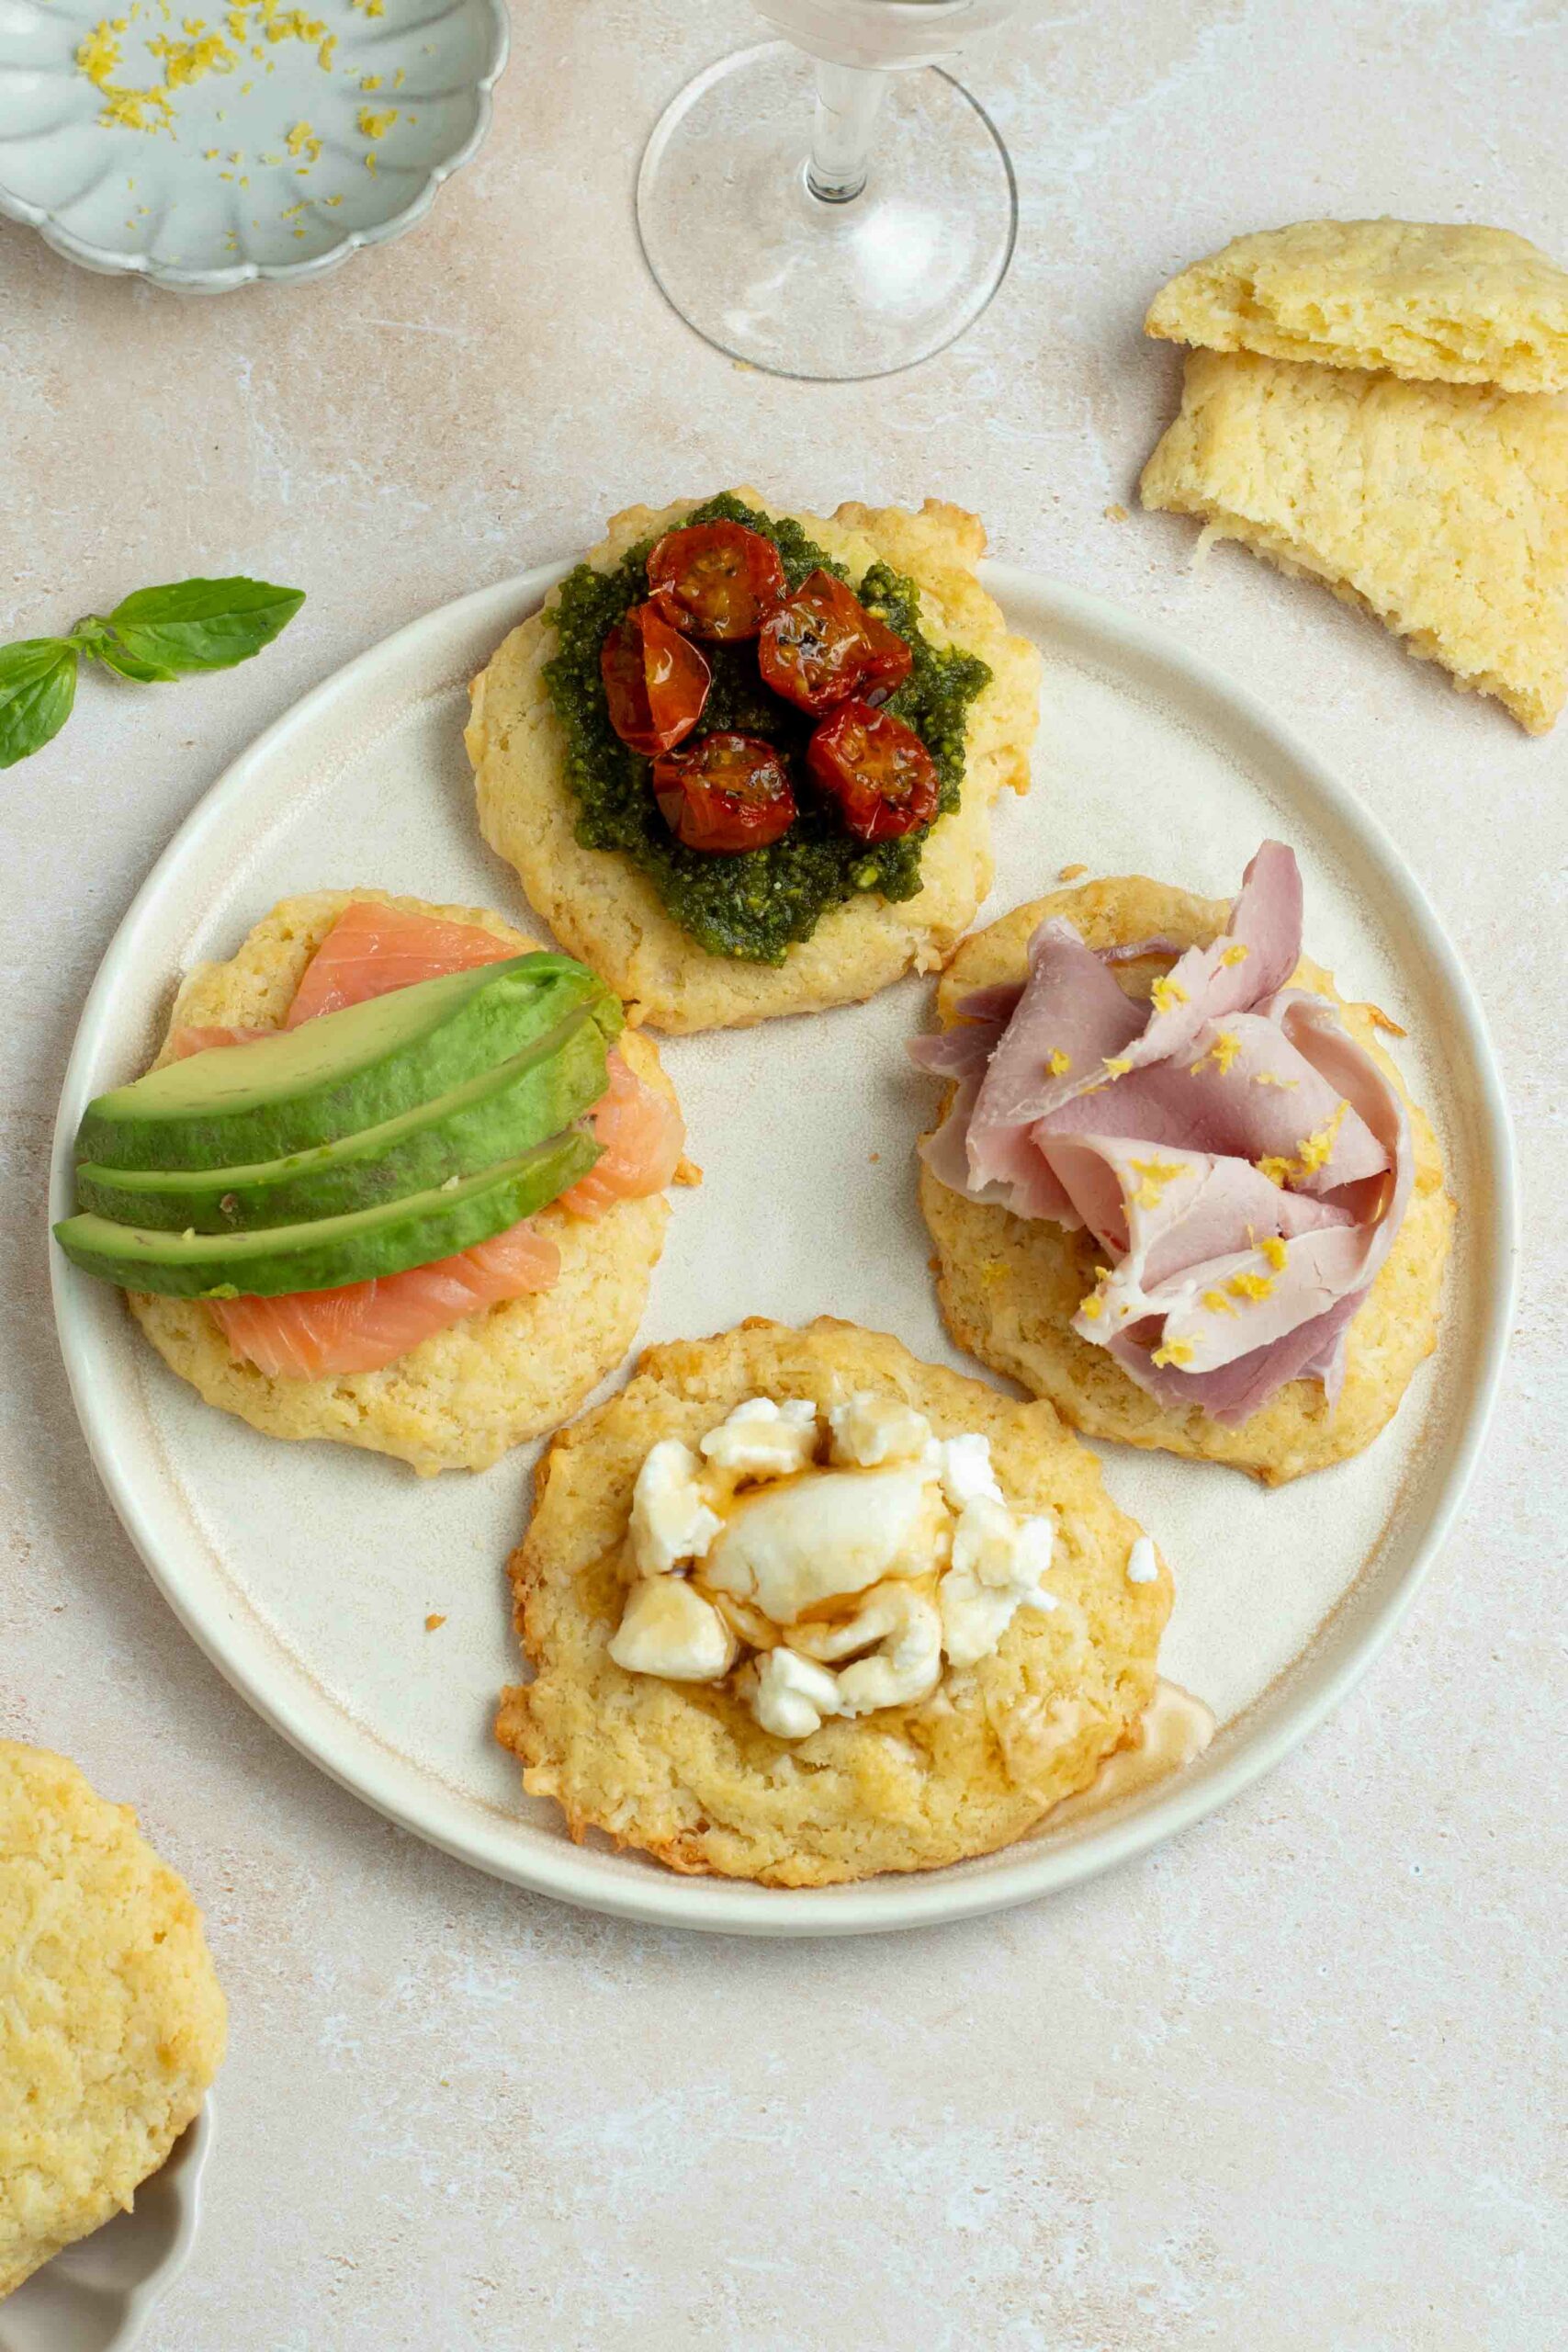 Four savory cookies in a beige plate with four different toppings.